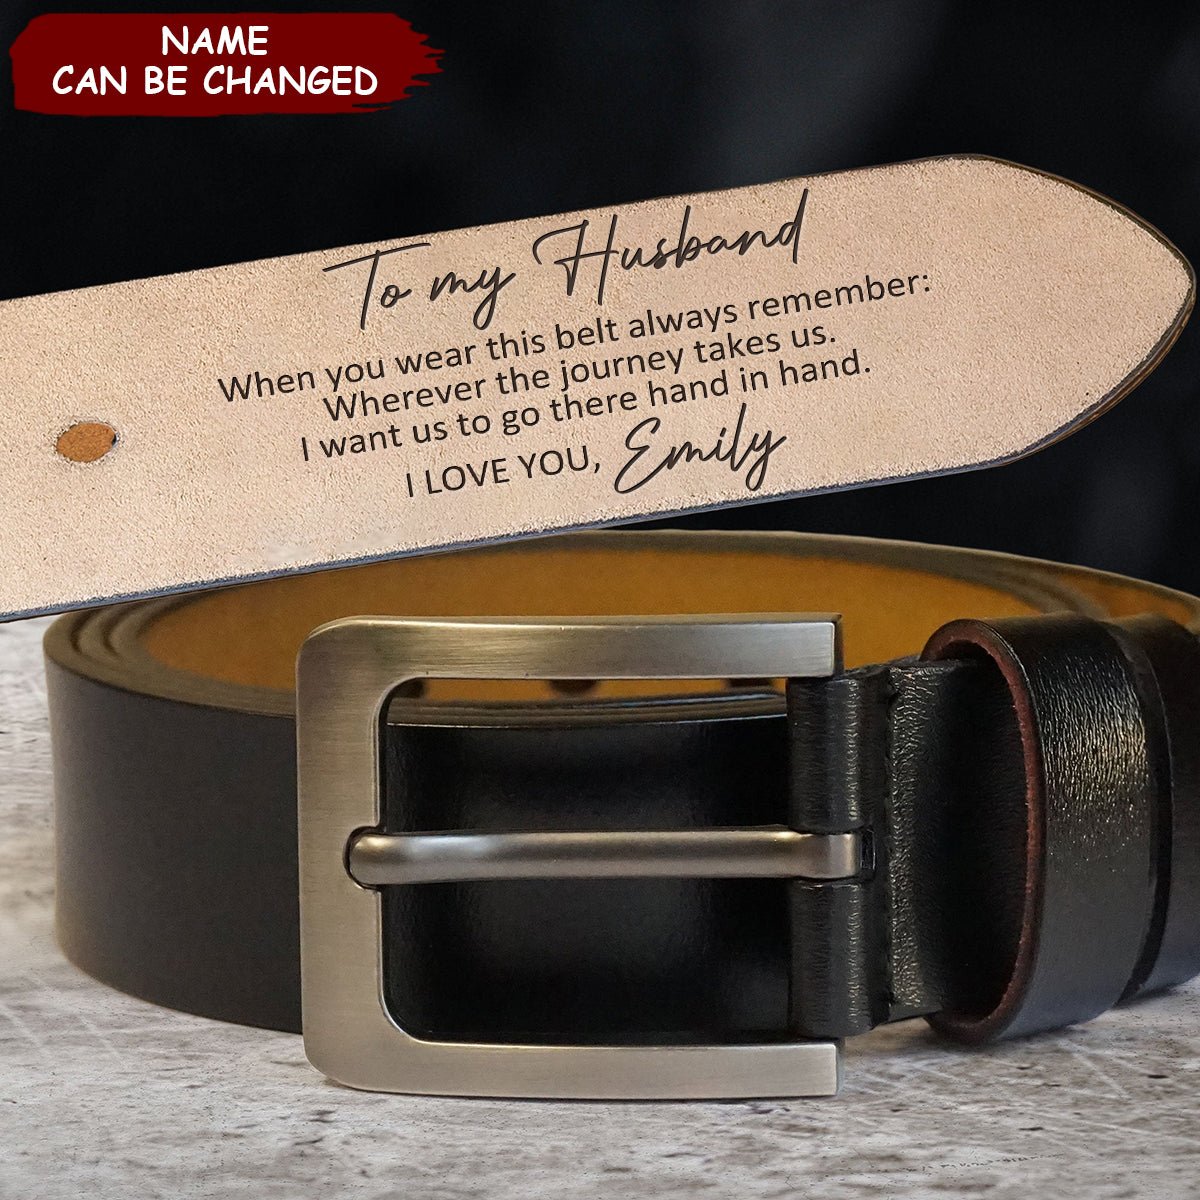 Couple - When You Wear This Belt Always Remember - Personalized Engraved Leather Belt (HN) - The Next Custom Gift